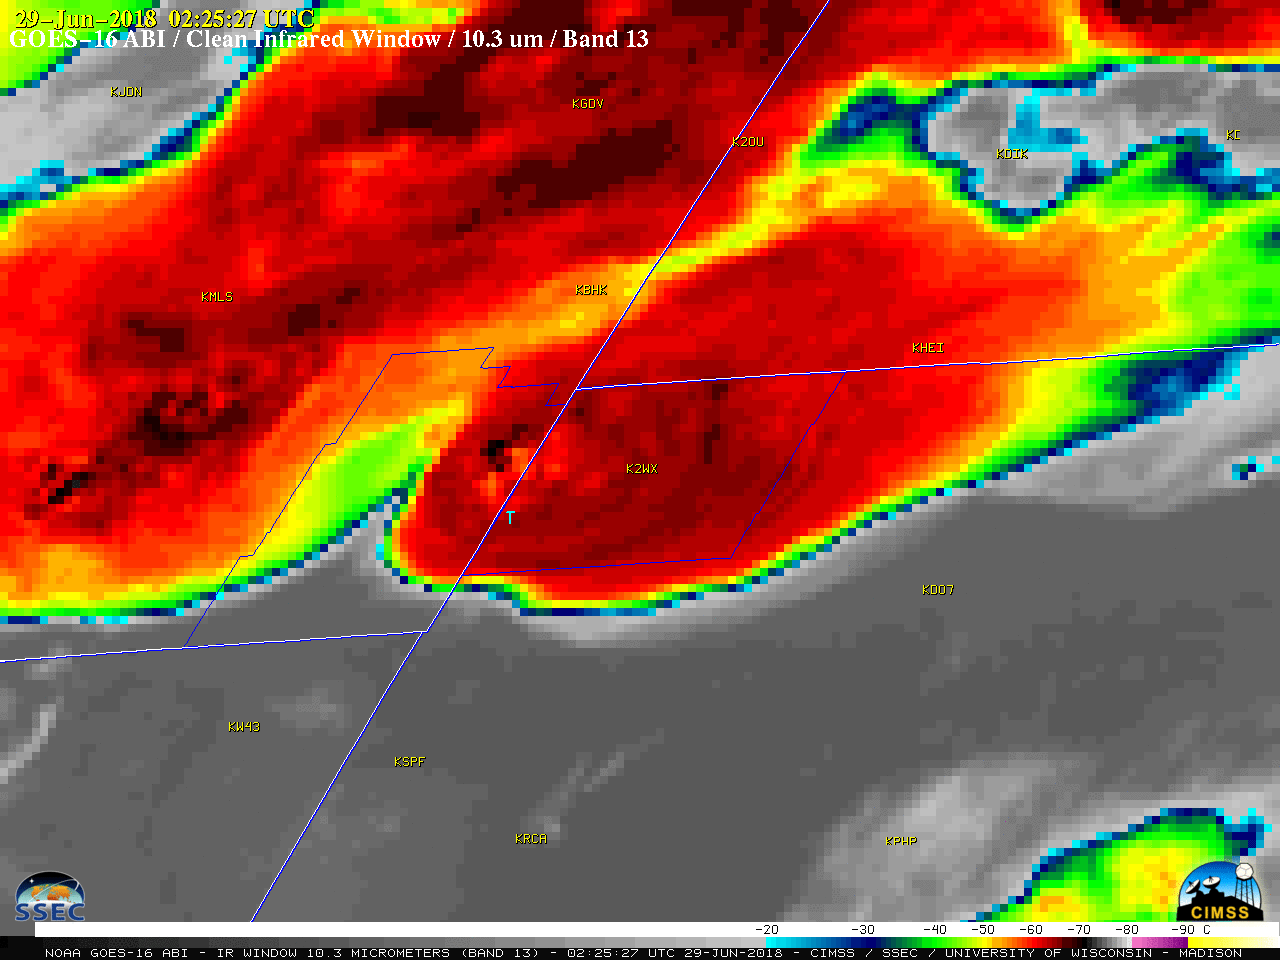 GOES-16 "Clean" Infrared Window (10.3 µm) images, with SPC storm reports plotted in red; Carter County, Montana and Harding County, South Dakota are outlined in blue [click to play MP4 animation]